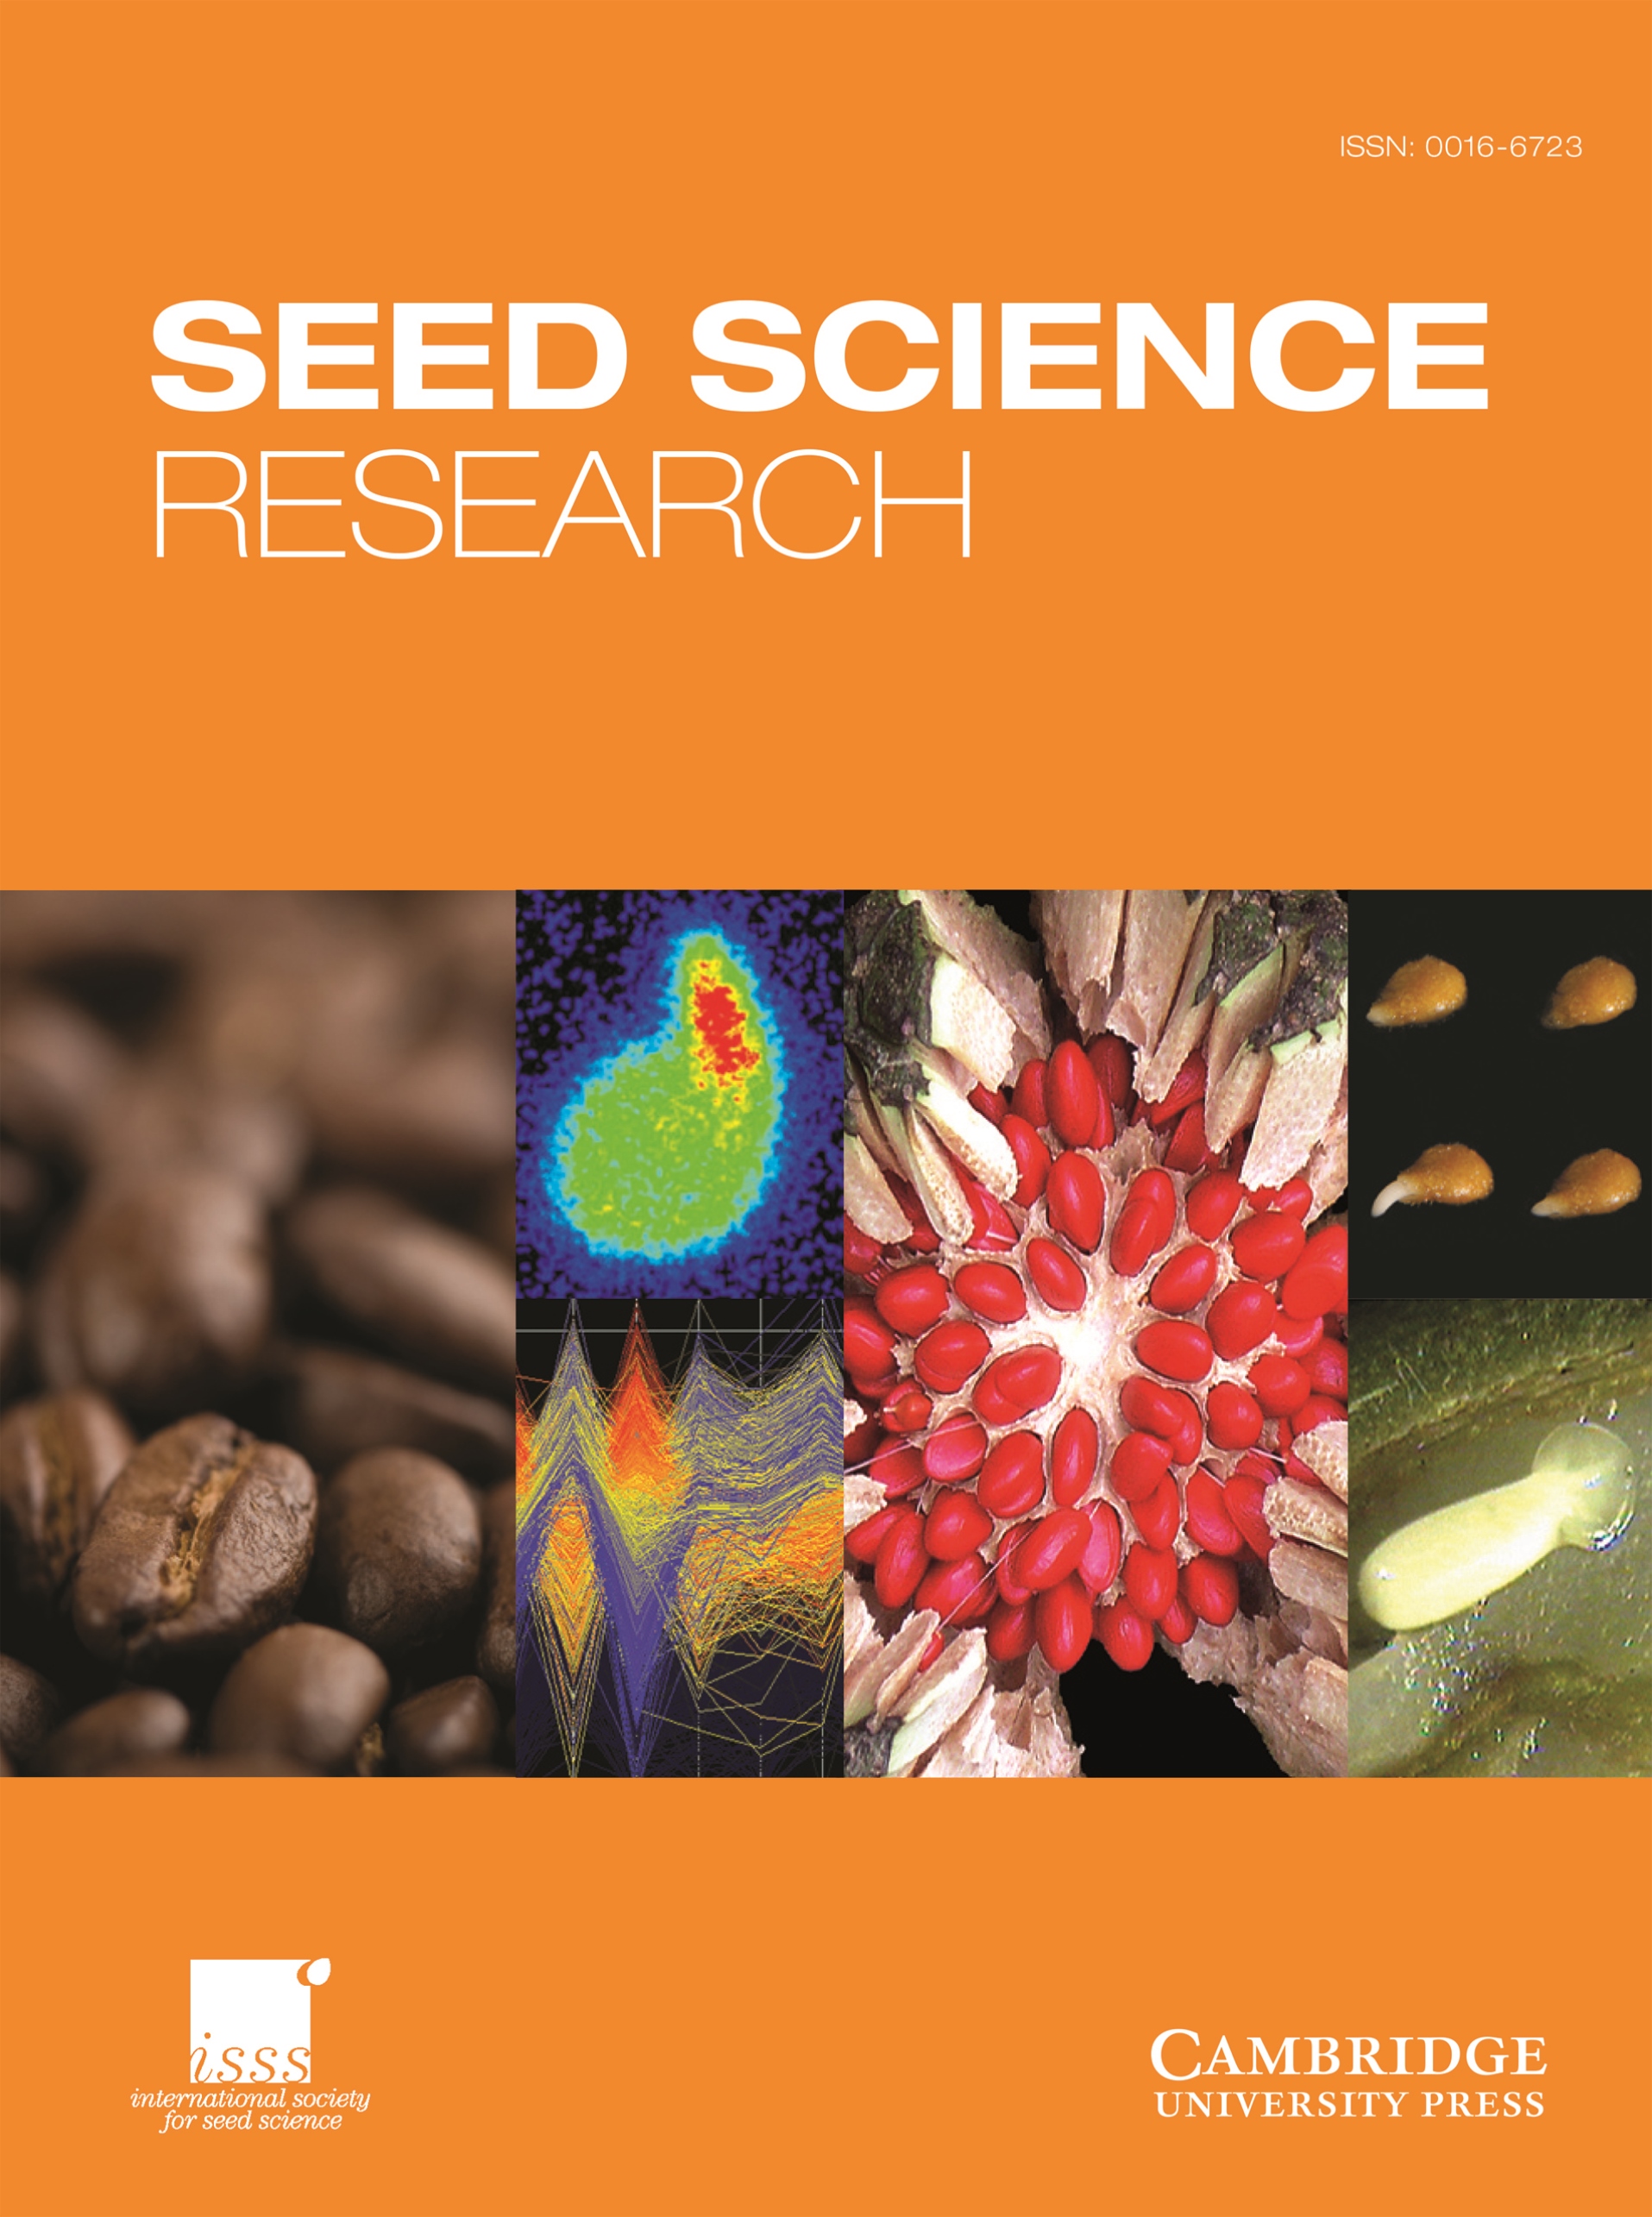 The role of light in regulating seed dormancy and germination - Yang - 2020  - Journal of Integrative Plant Biology - Wiley Online Library